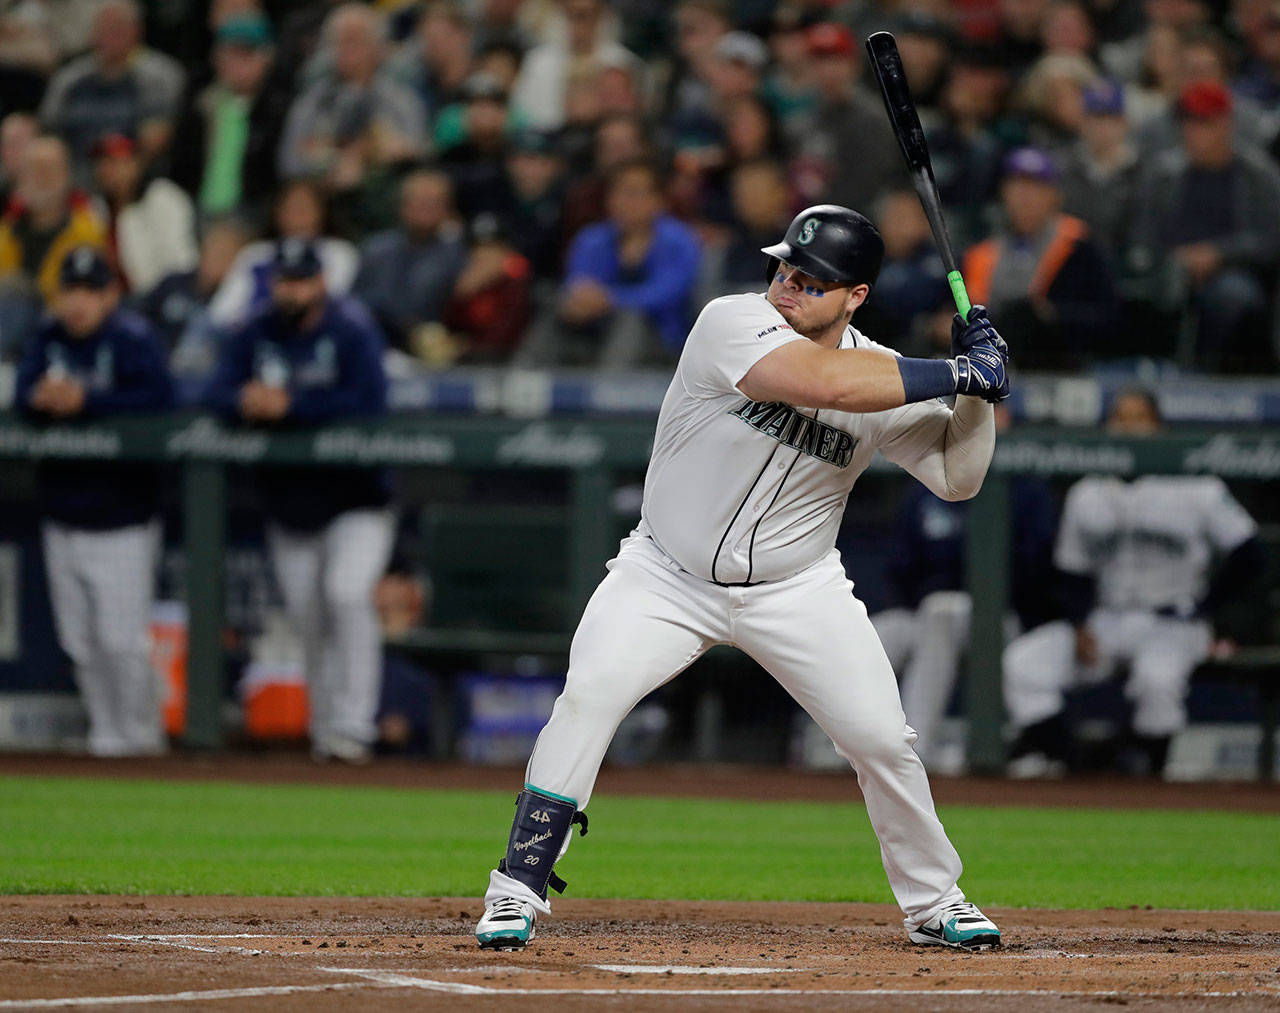 Mariners designated hitter Daniel Vogelbach begins his swing during an at-bat against the Cardinals on July 2, 2019, in Seattle. (AP Photo/Ted S. Warren)